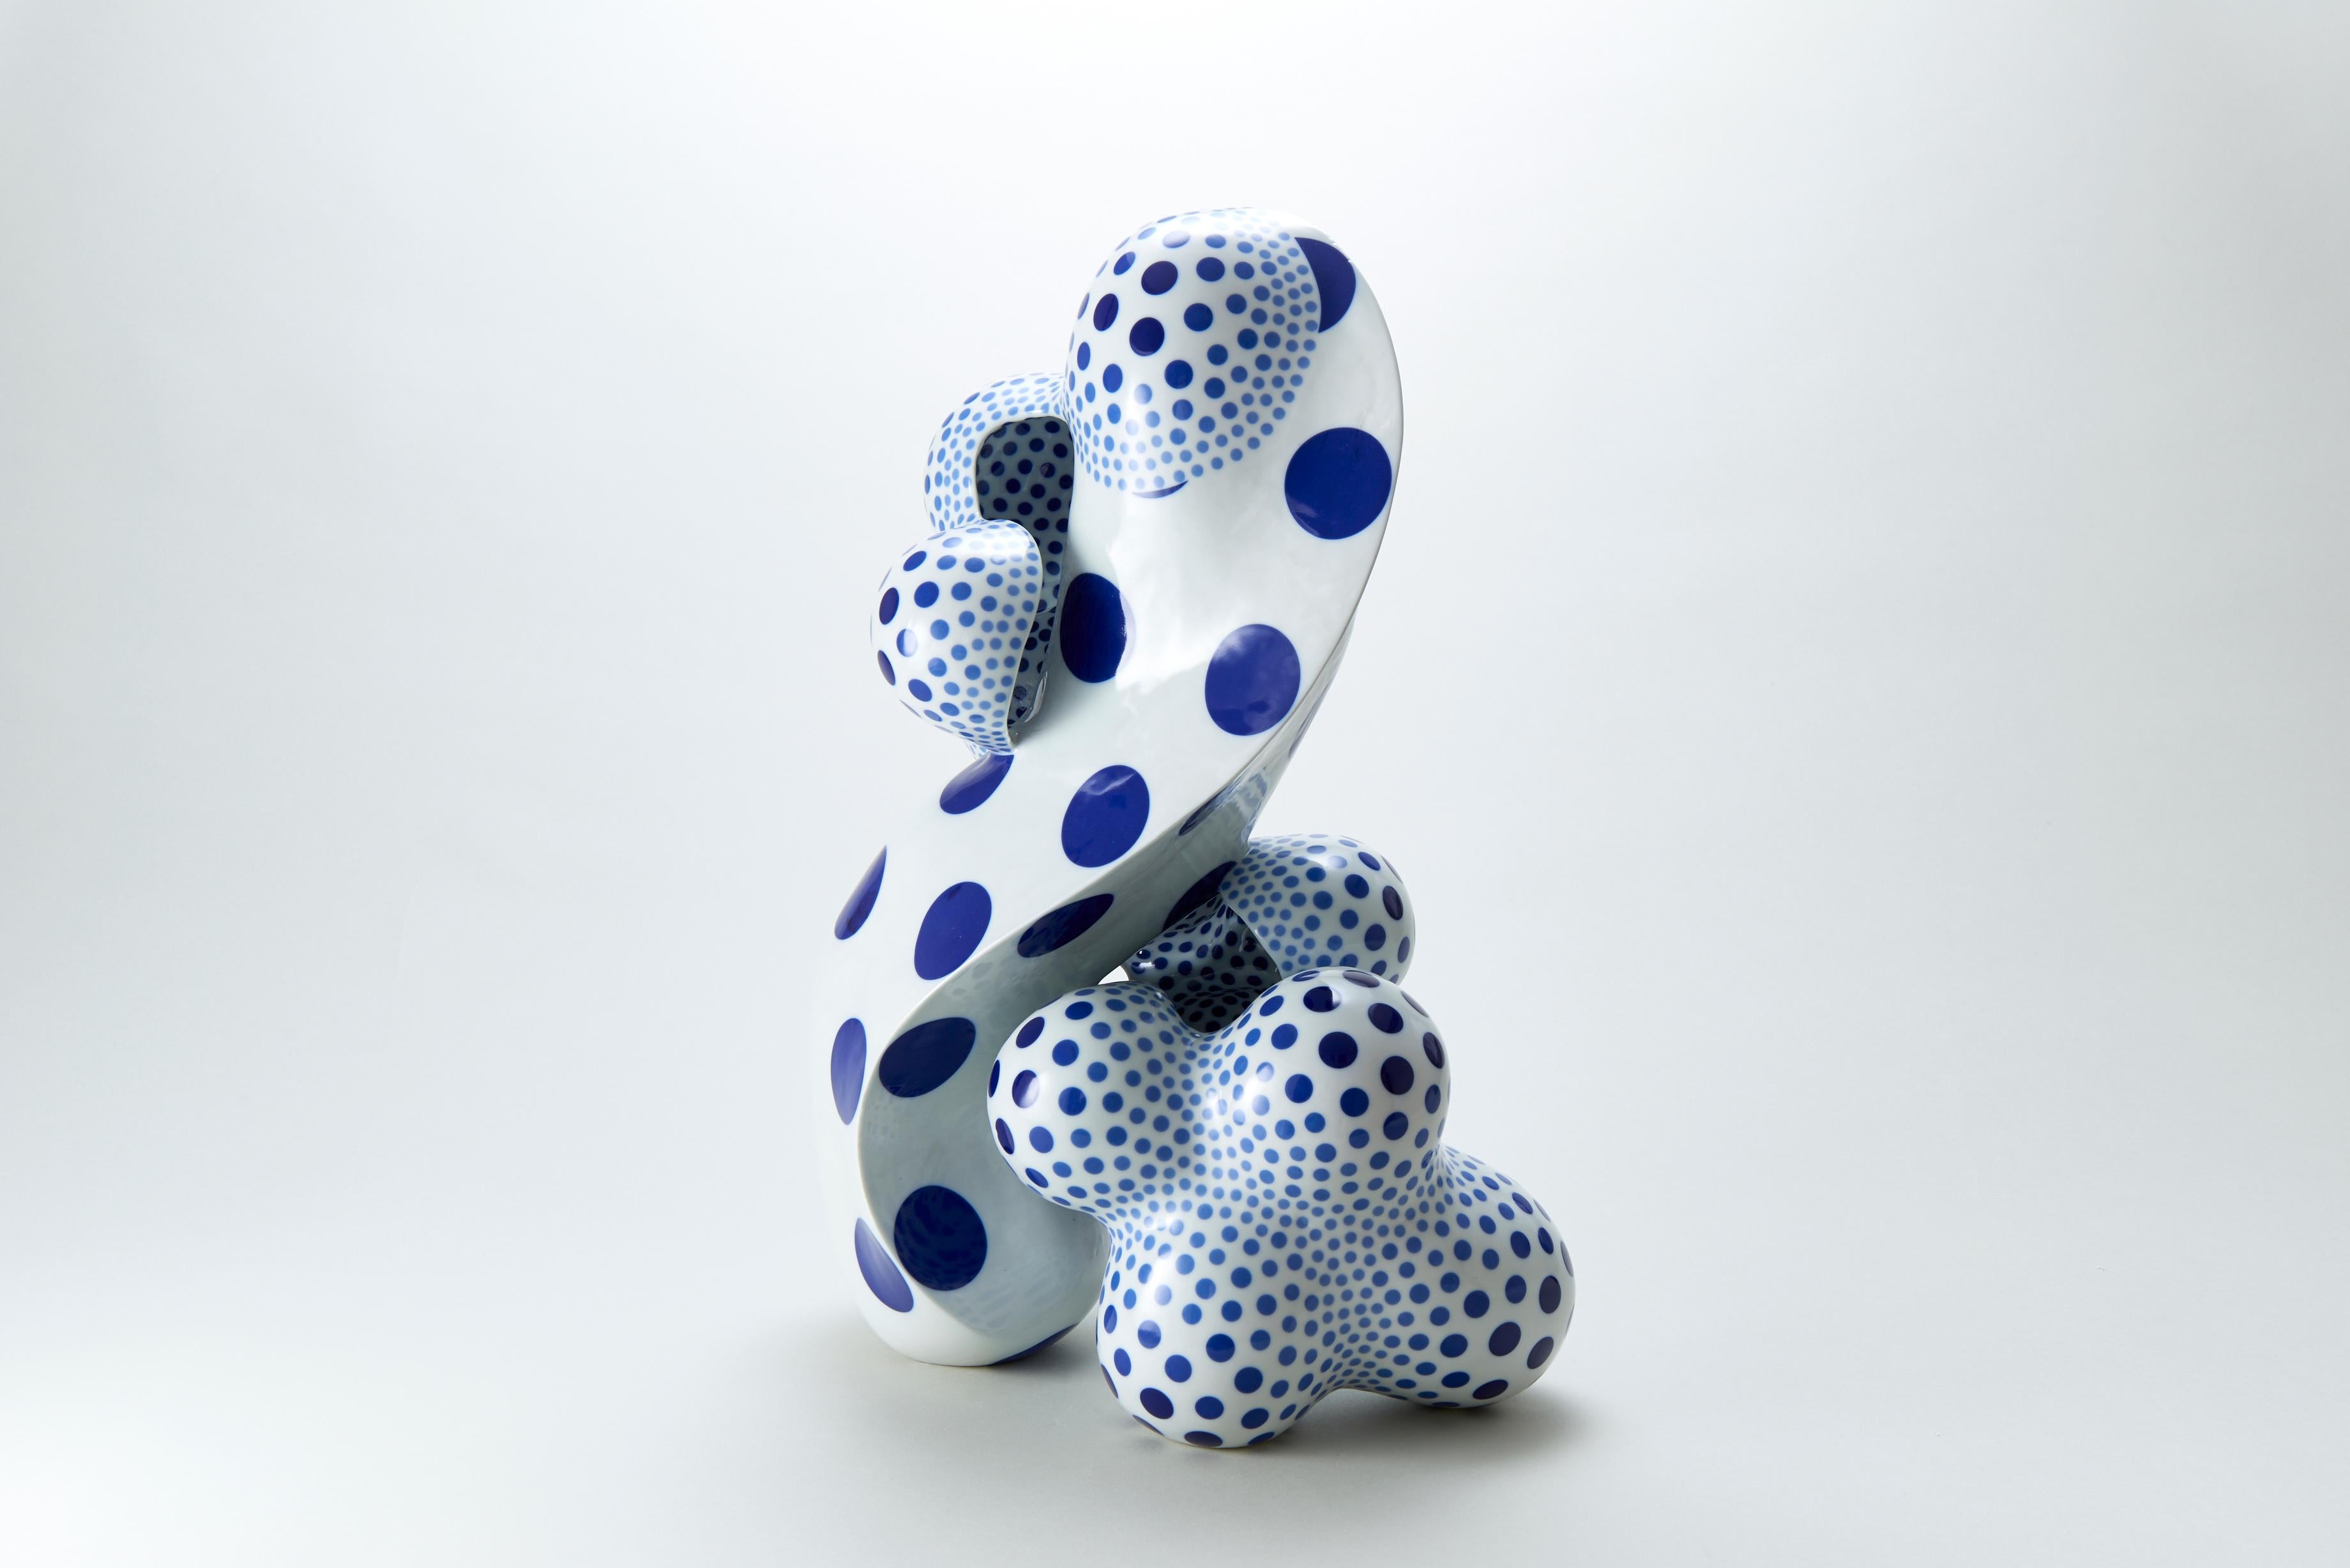 Harumi Nakashima Abstract Sculpture - "A Disclosing Form 1610", Abstract Ceramic Sculpture, Glazed Surface, Porcelain